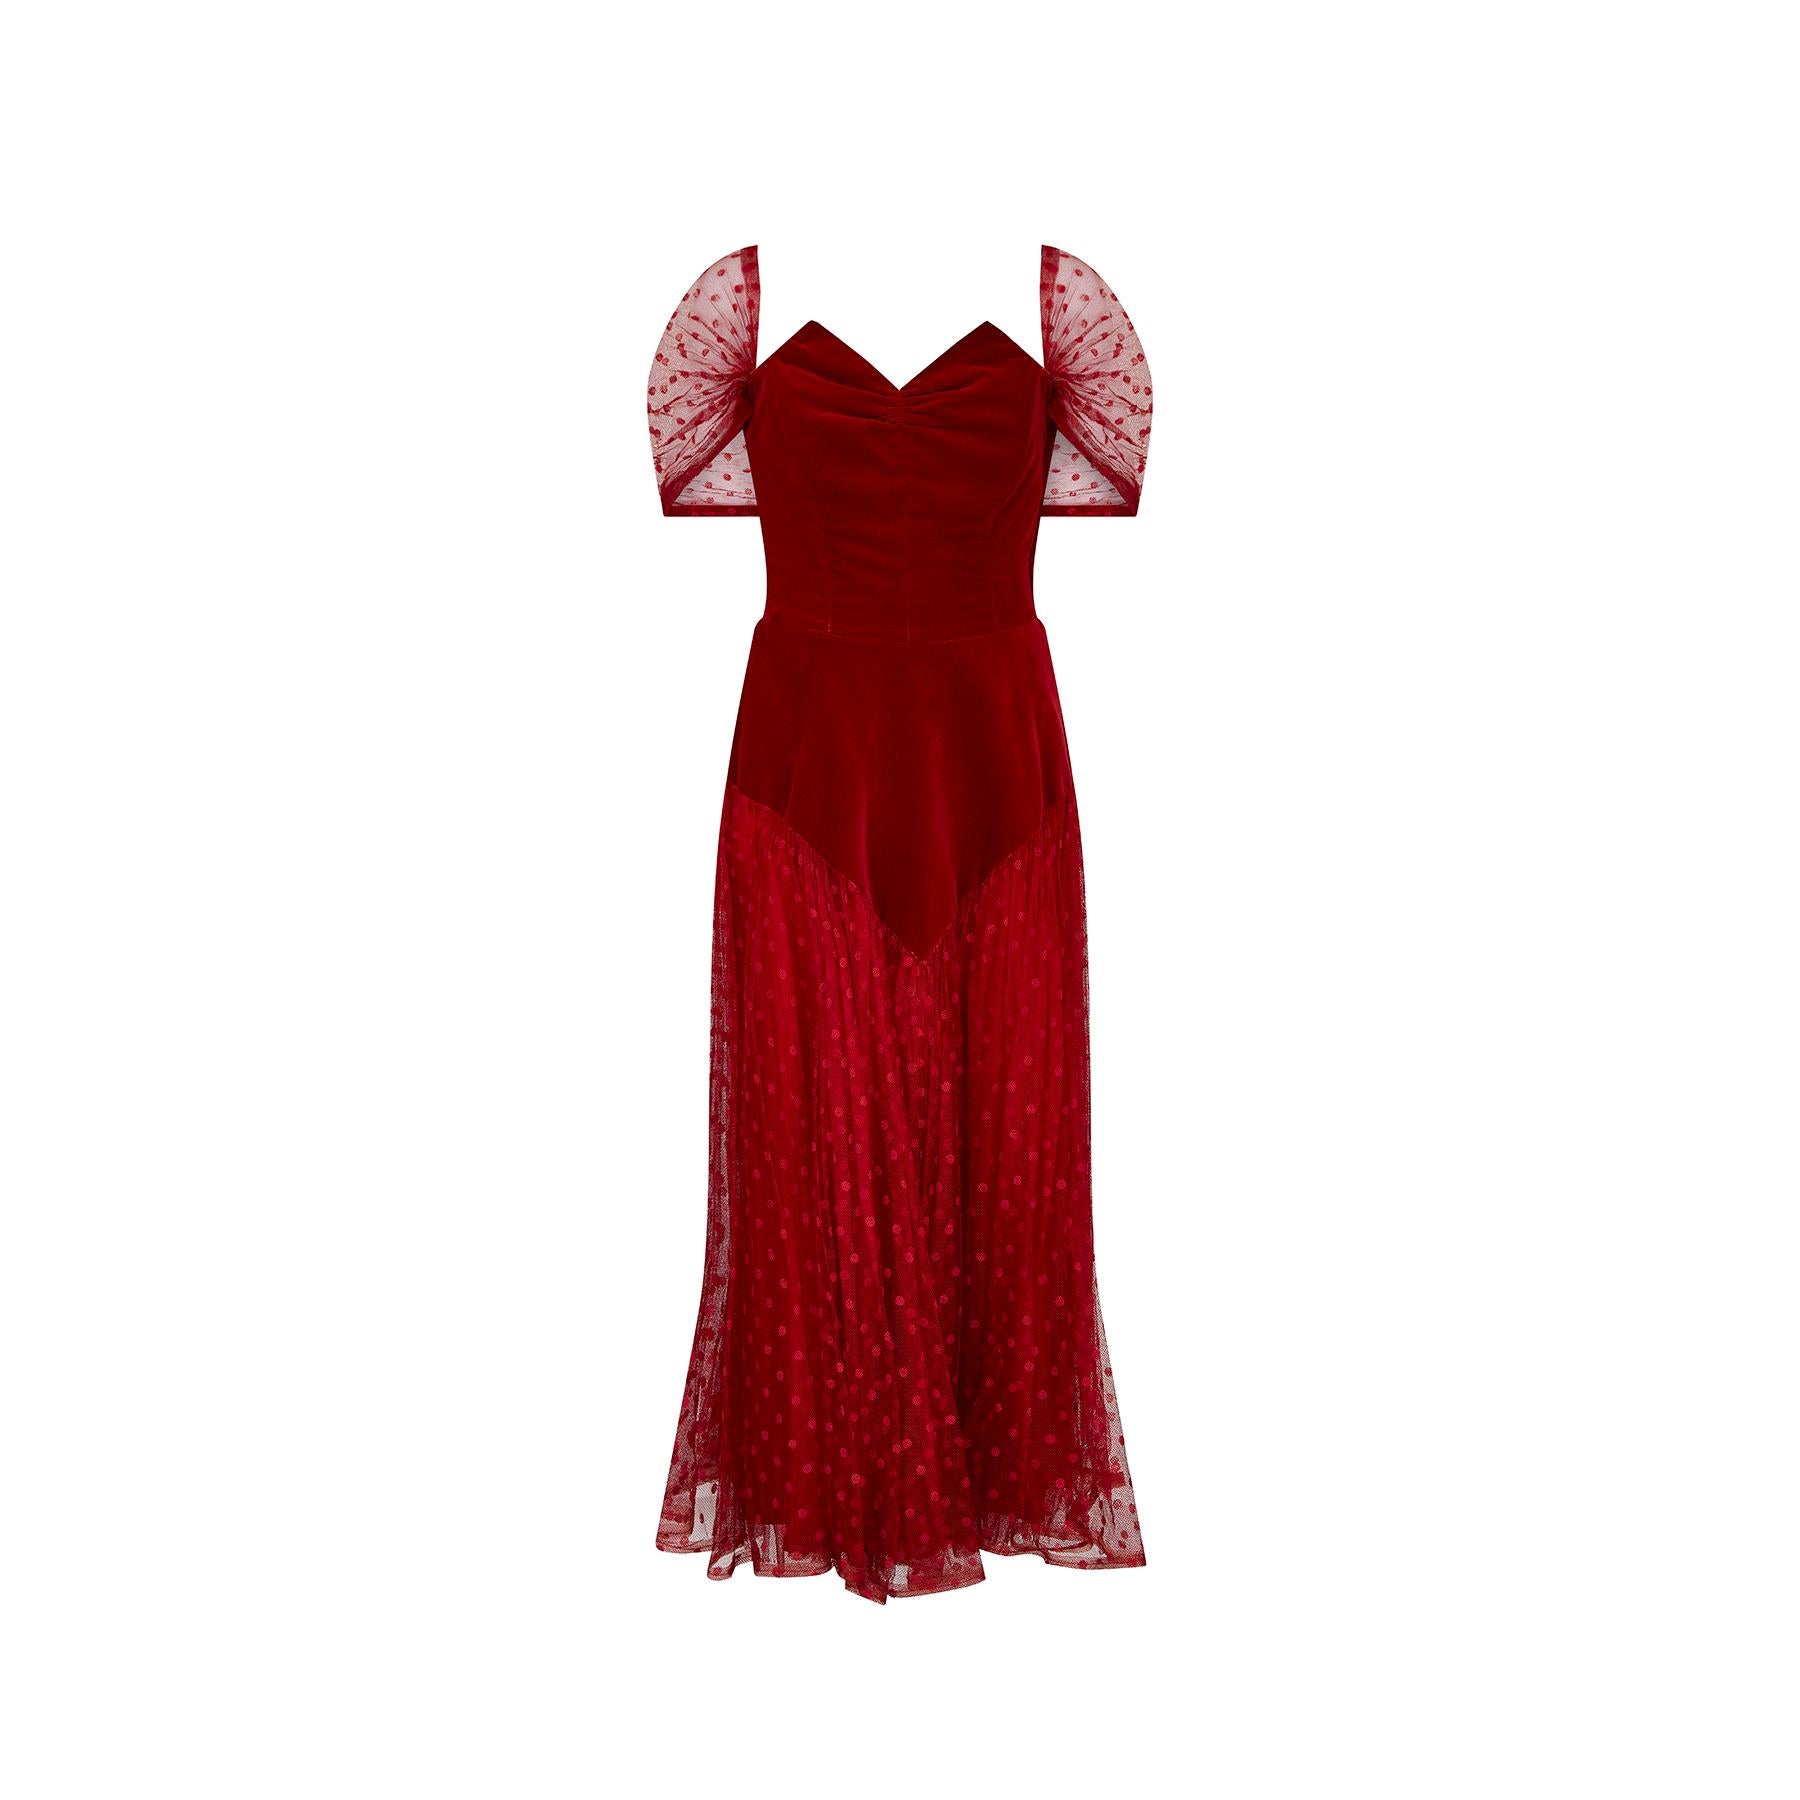 An exceptional red velvet and tulle evening dress in a classic 1950s silhouette. The main bodice is made from a deep crimson red velvet, with a gathered bust which has internal boning to add structure. The dress fastens down the side with the